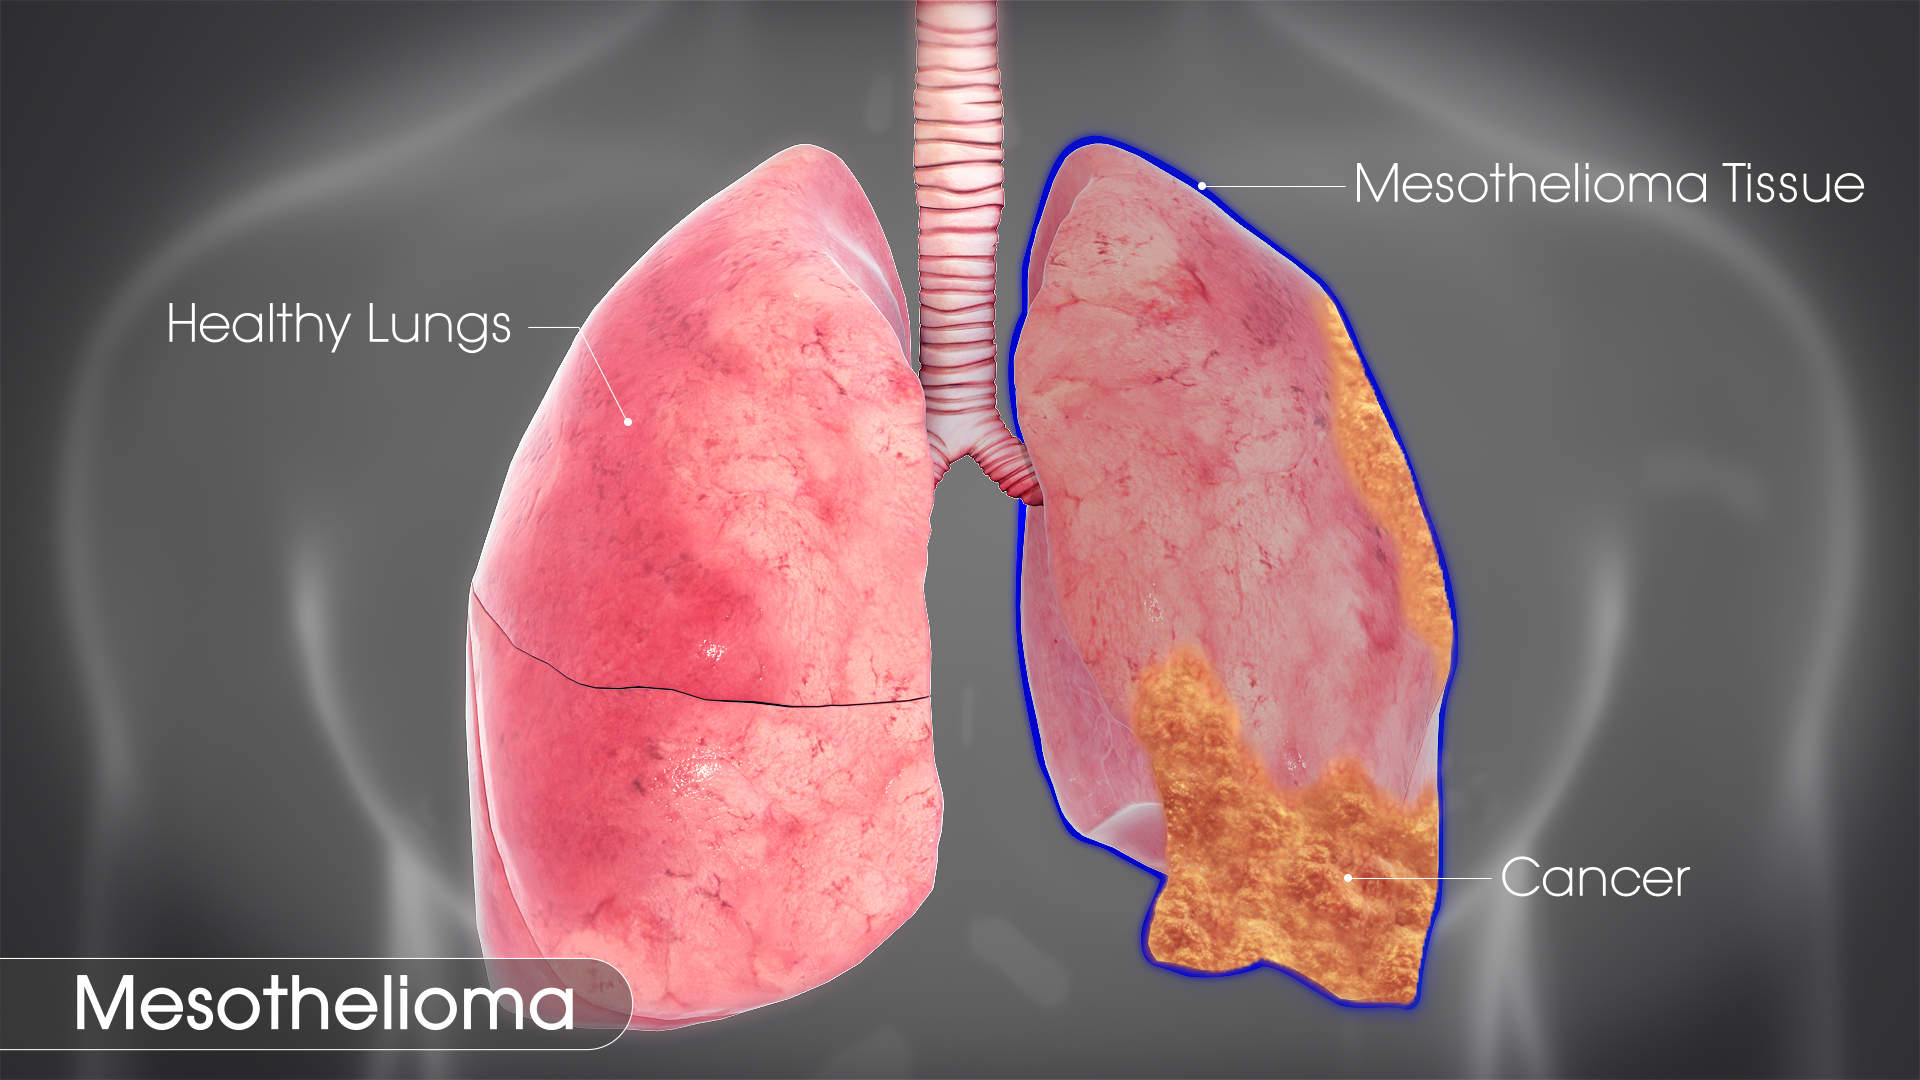 peritoneal-mesothelioma-causes-symptoms-and-treatment-options